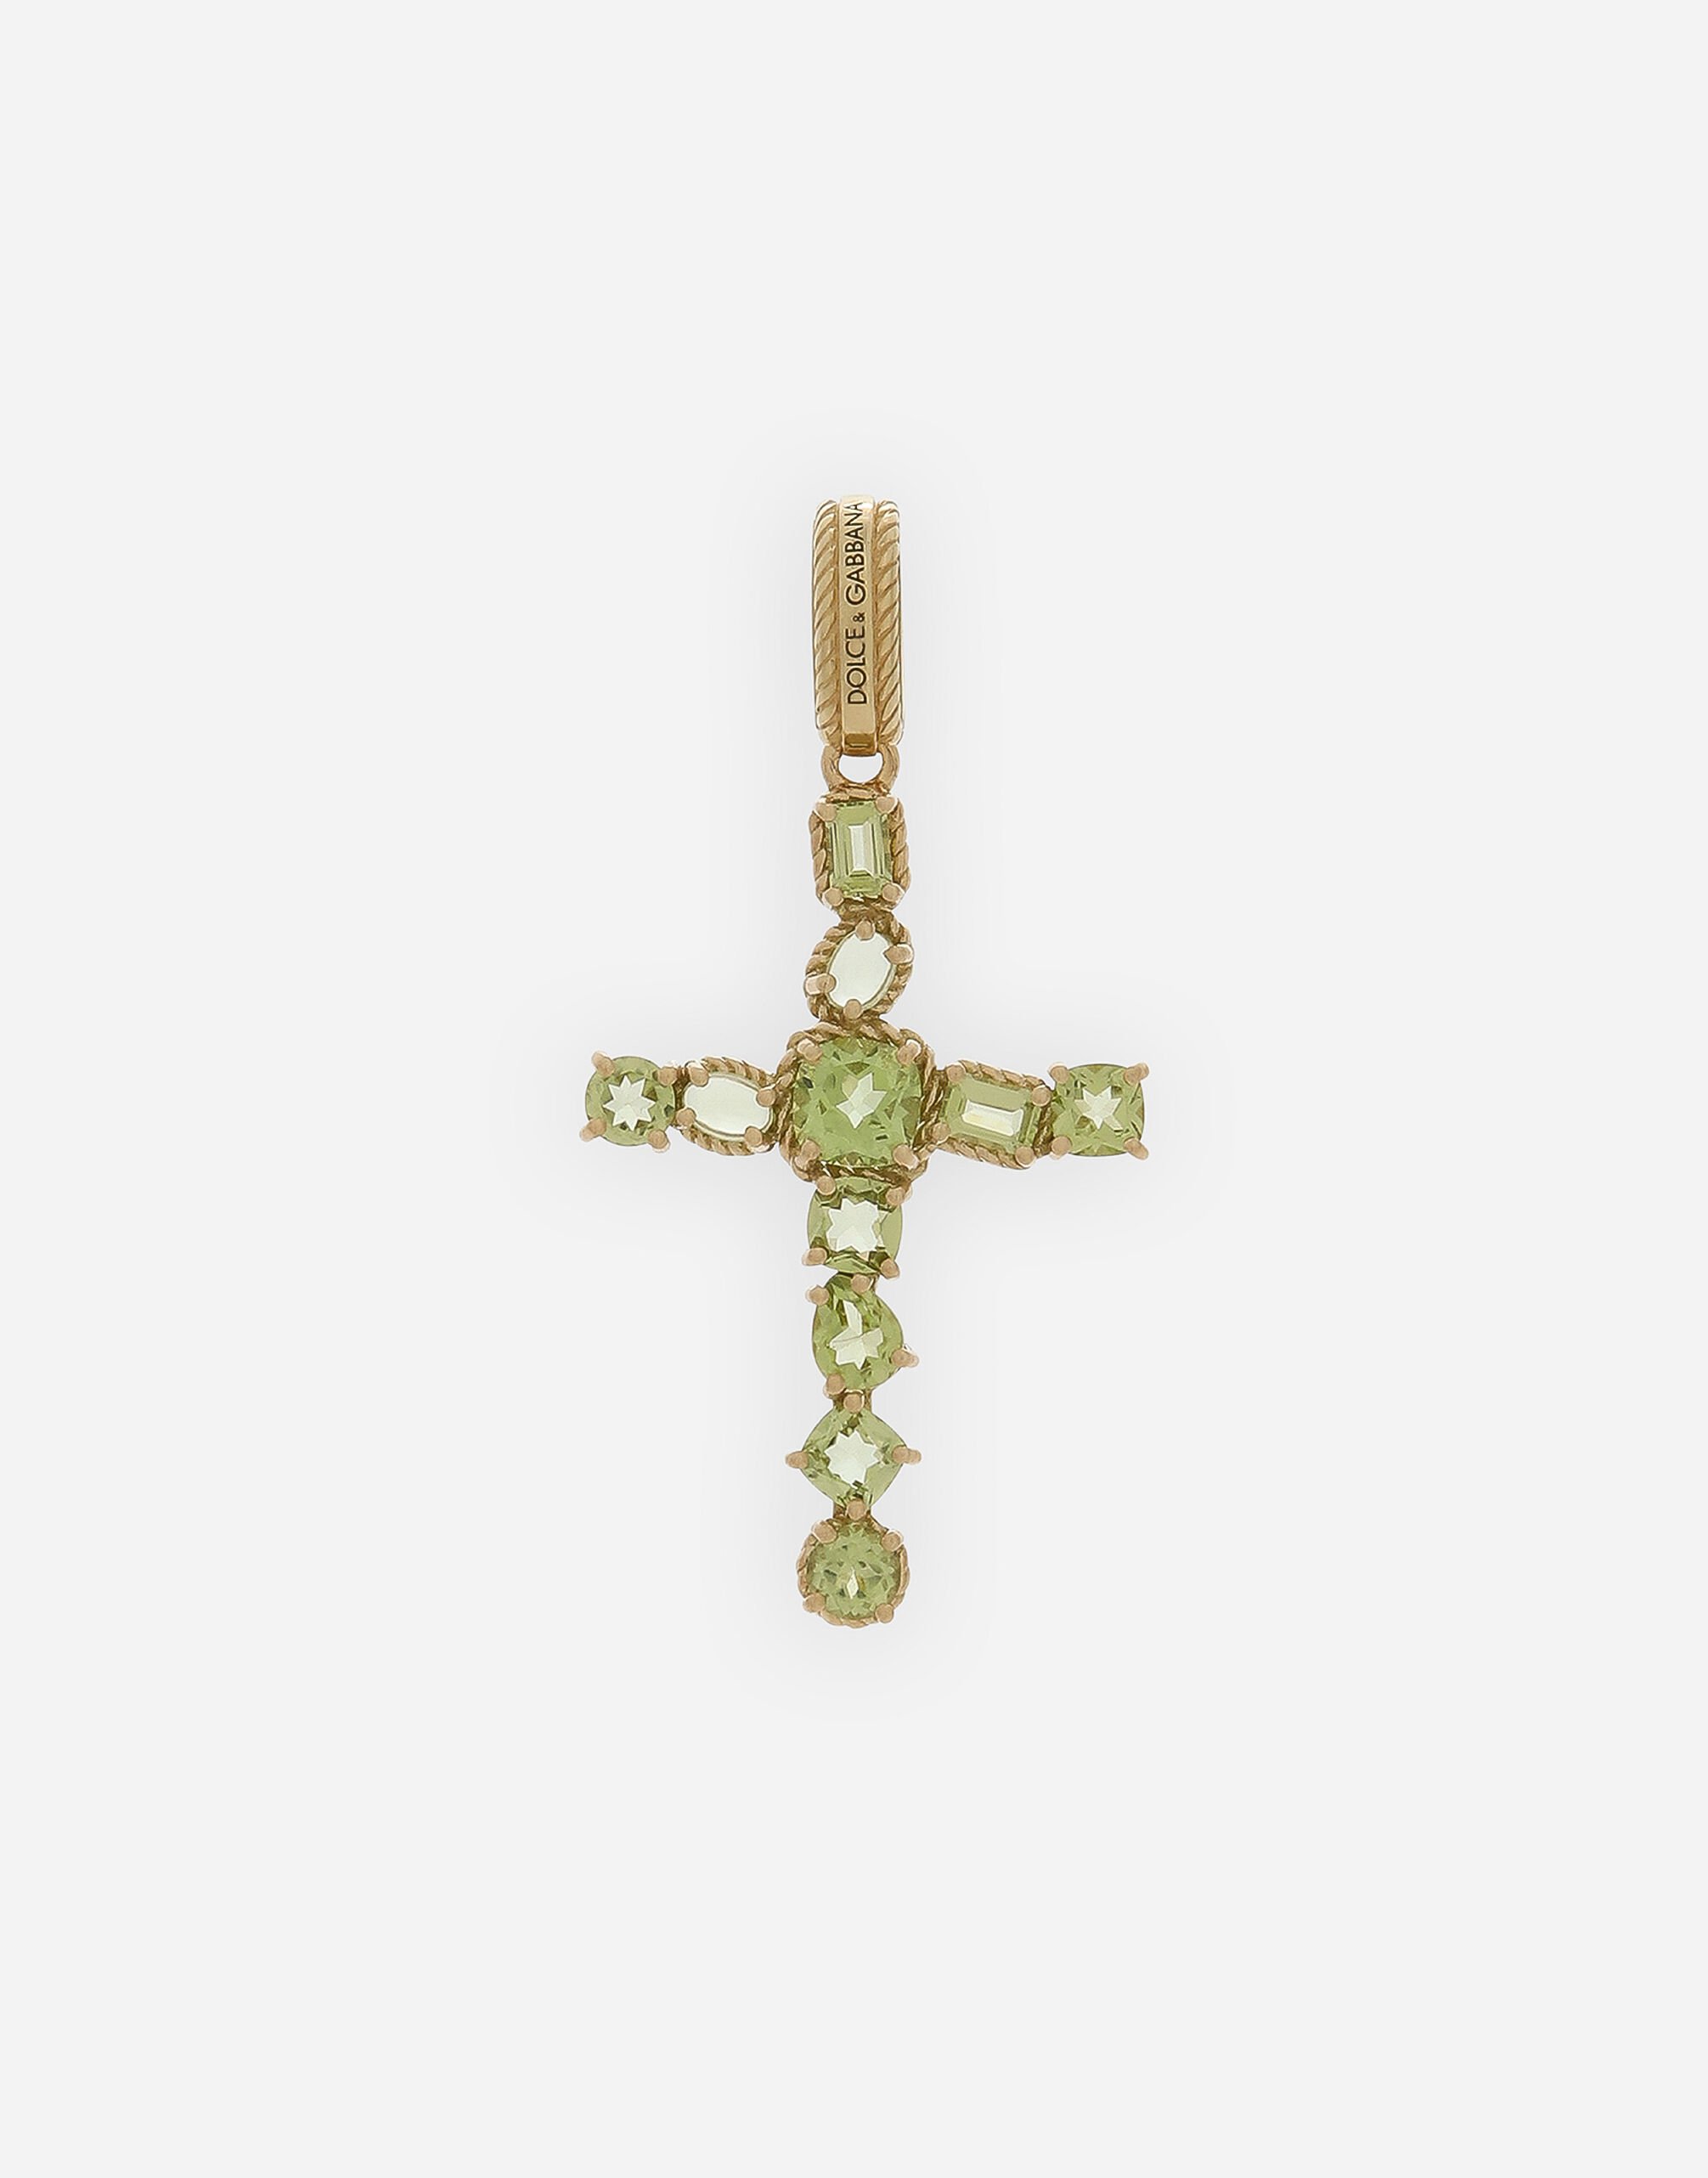 Dolce & Gabbana Anna Charm in yellow gold 18Kt and peridots Yellow gold WAPR1GWMIX6